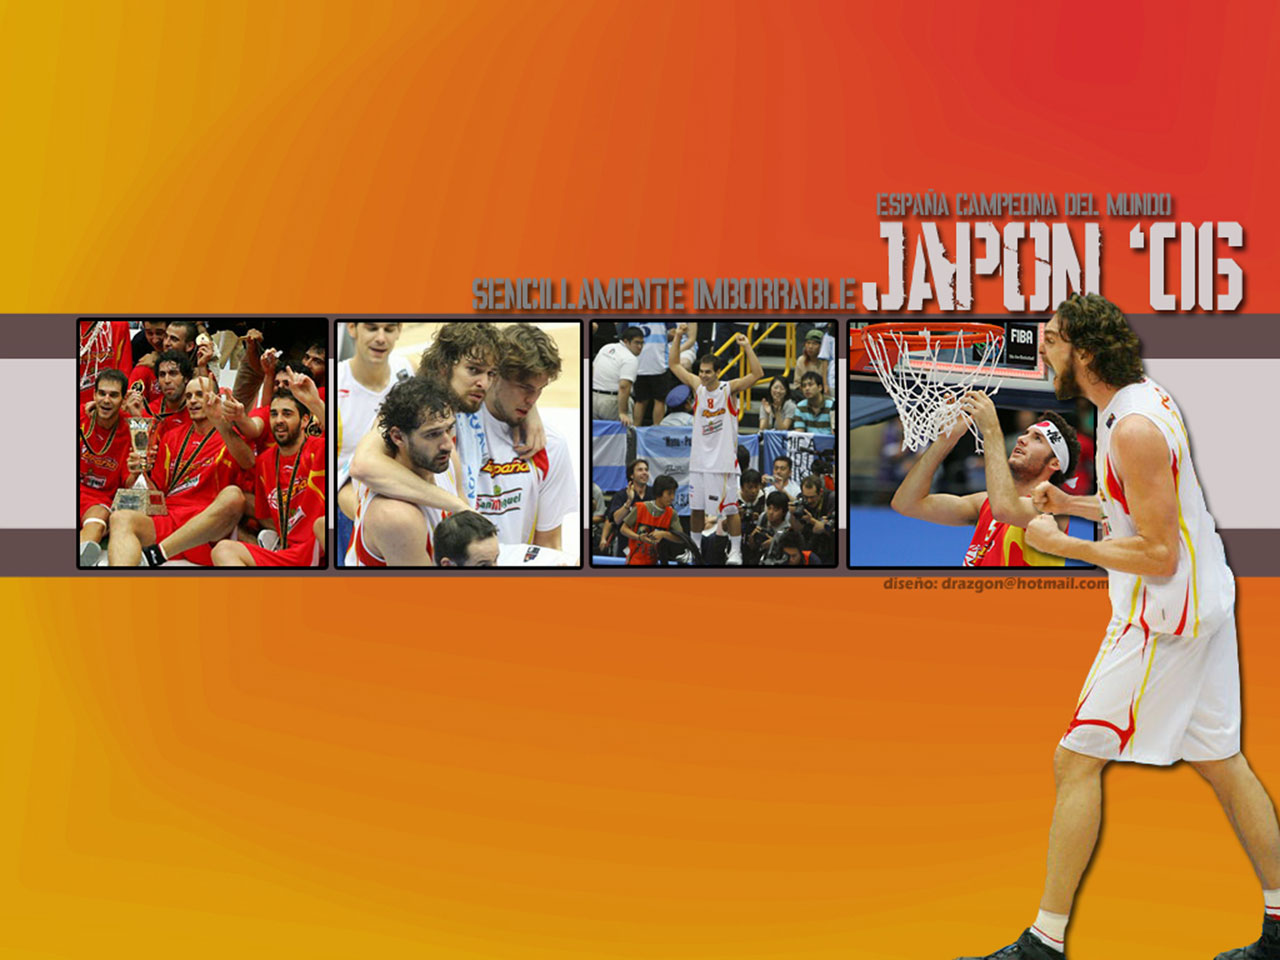 ll add is wallpaper of Pau Gasol and few pictures made after Spain